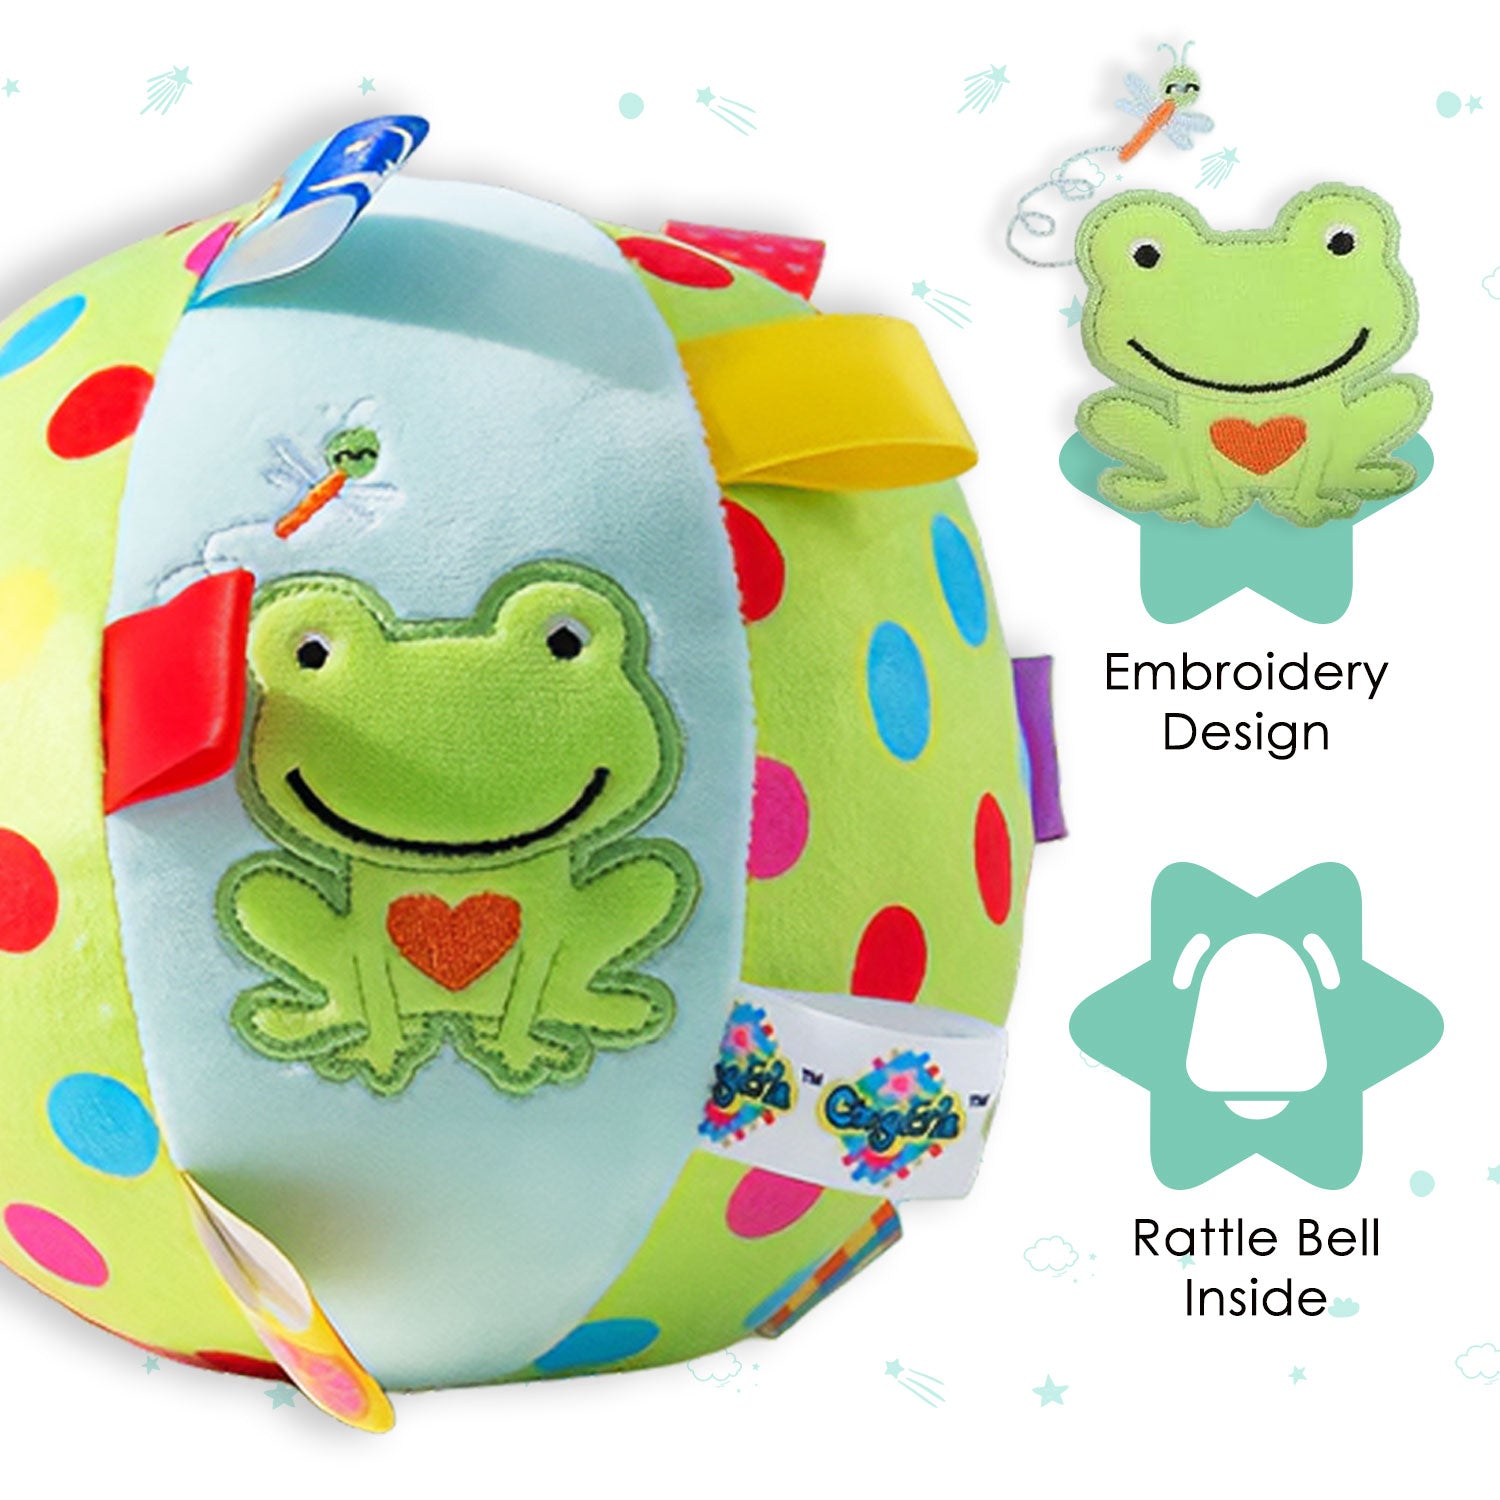 Baby Moo Jumping Frog Colorful Tag Soft Plush Rattle Ball - Green